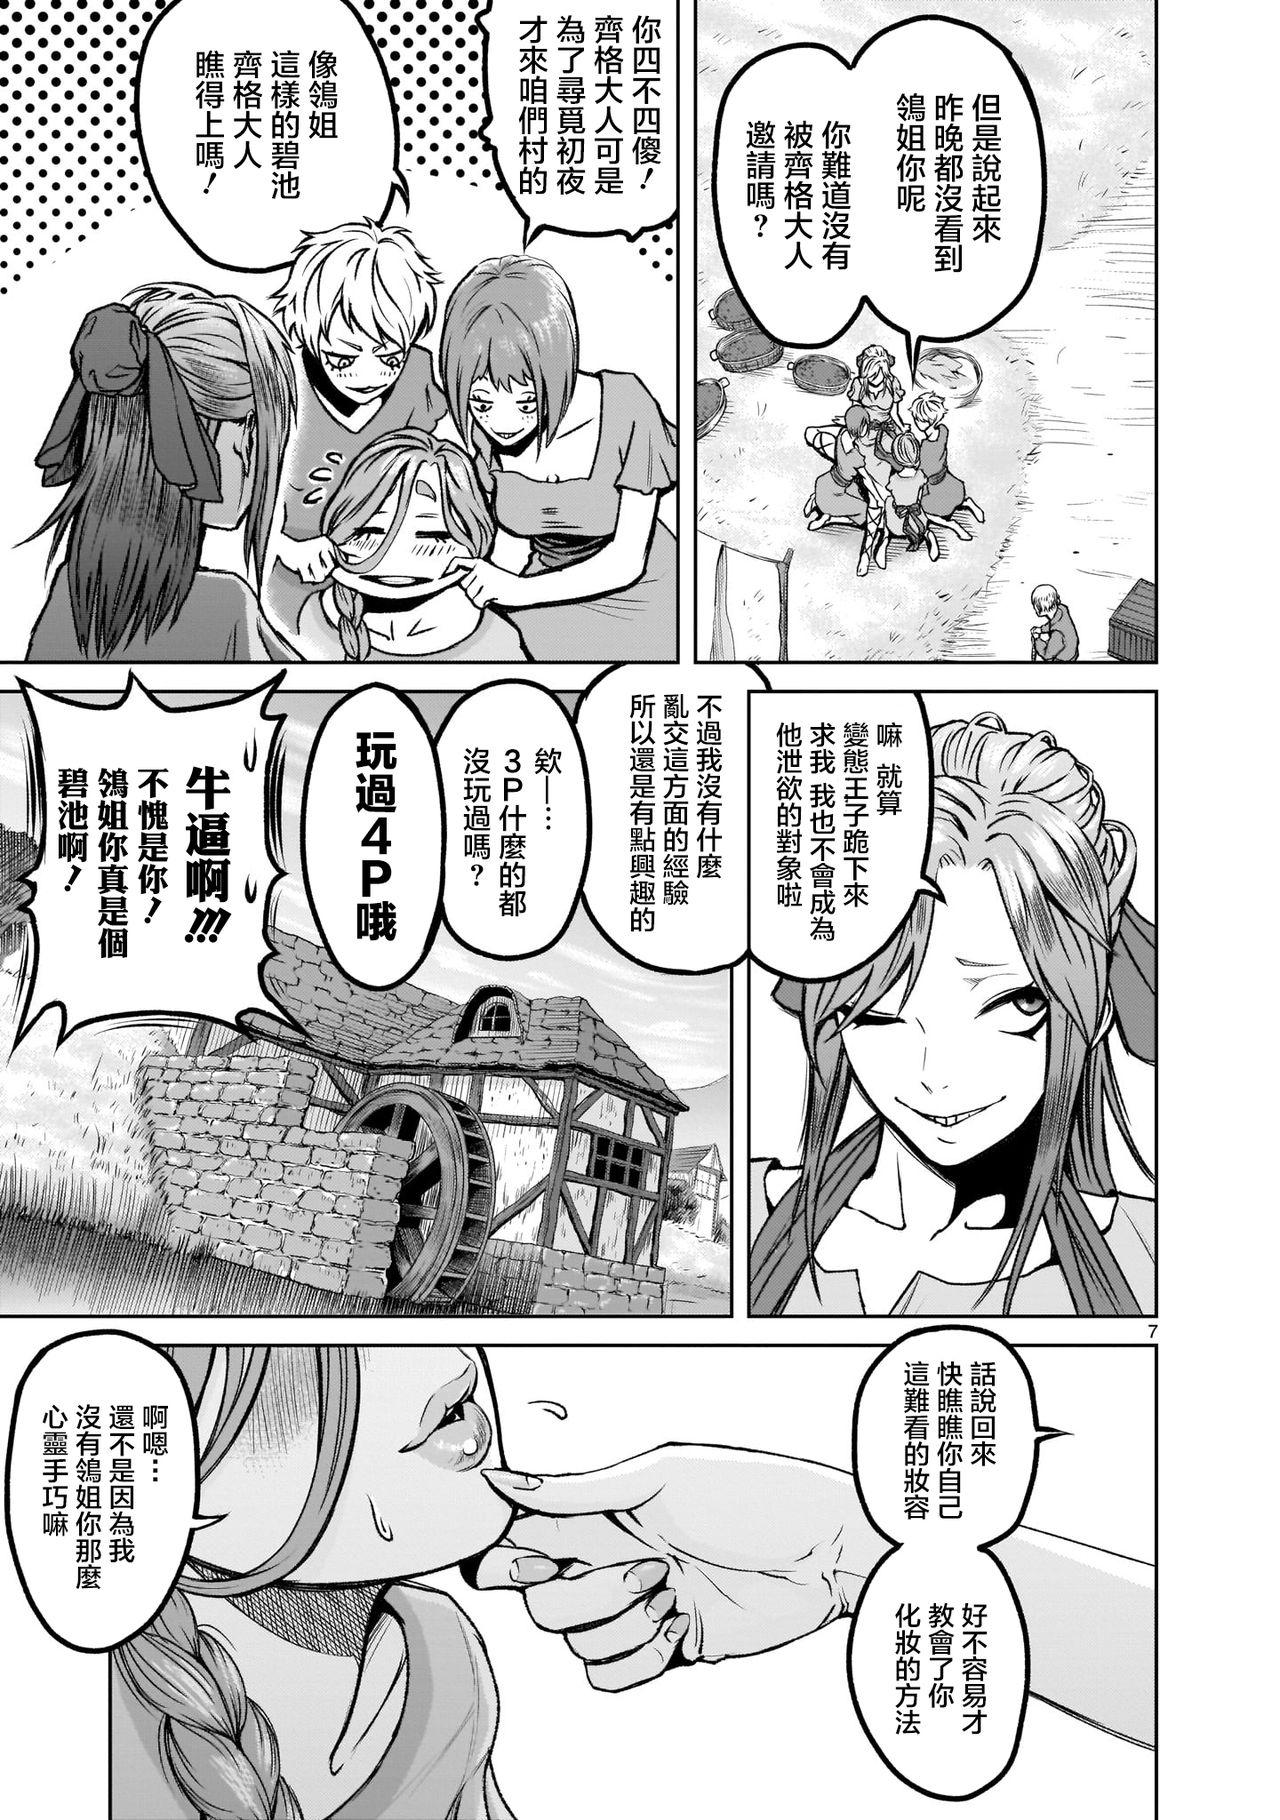 Blackmail 蔷薇园传奇 01-08 Chinese Married - Page 8